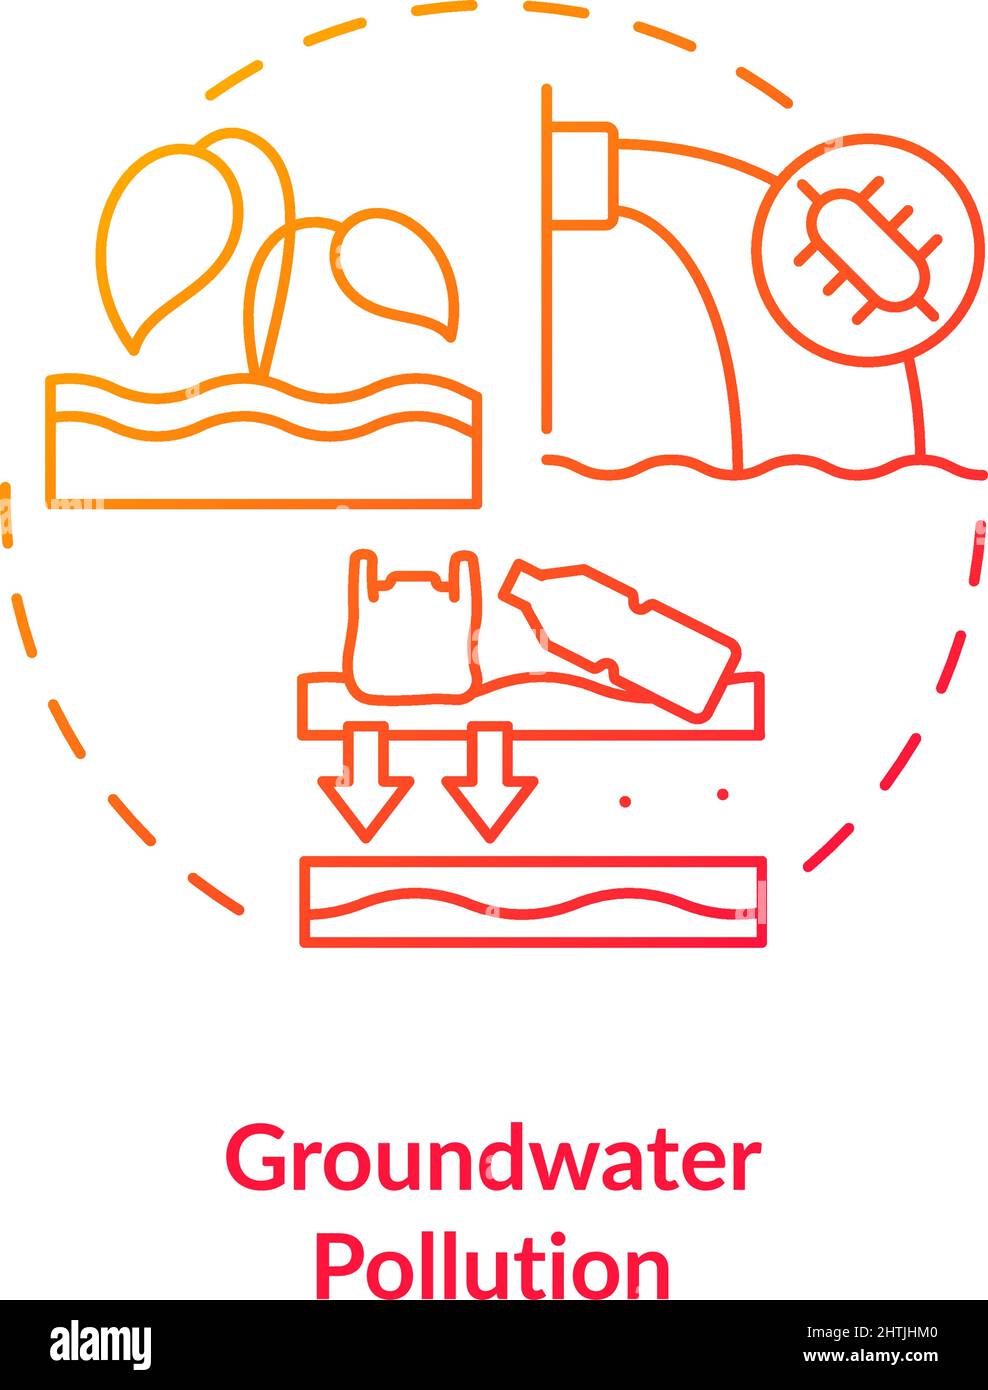 Groundwater pollution red gradient concept icon Stock Vector